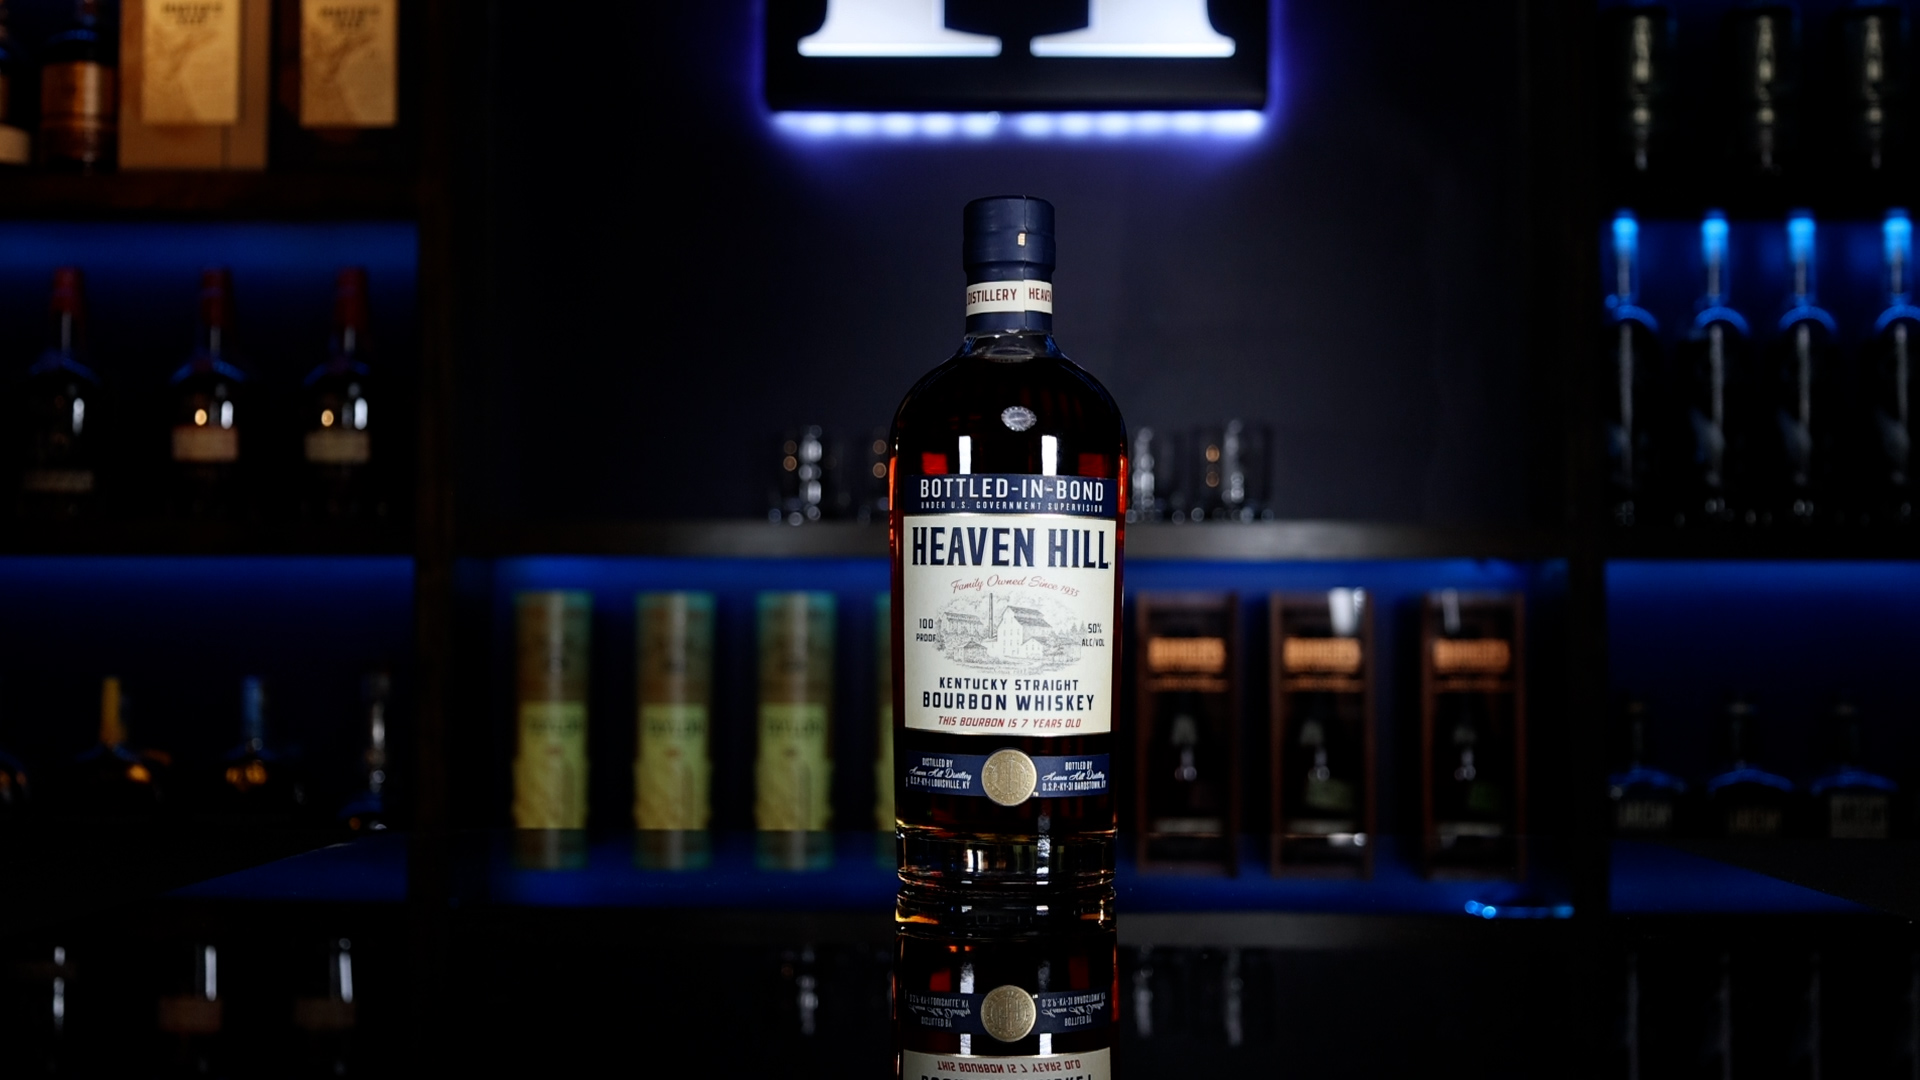 A bottle of Heaven Hill Bottled-in-Bond 7 Year whiskey sits on a table with a Homebar.io logo sign in the background.